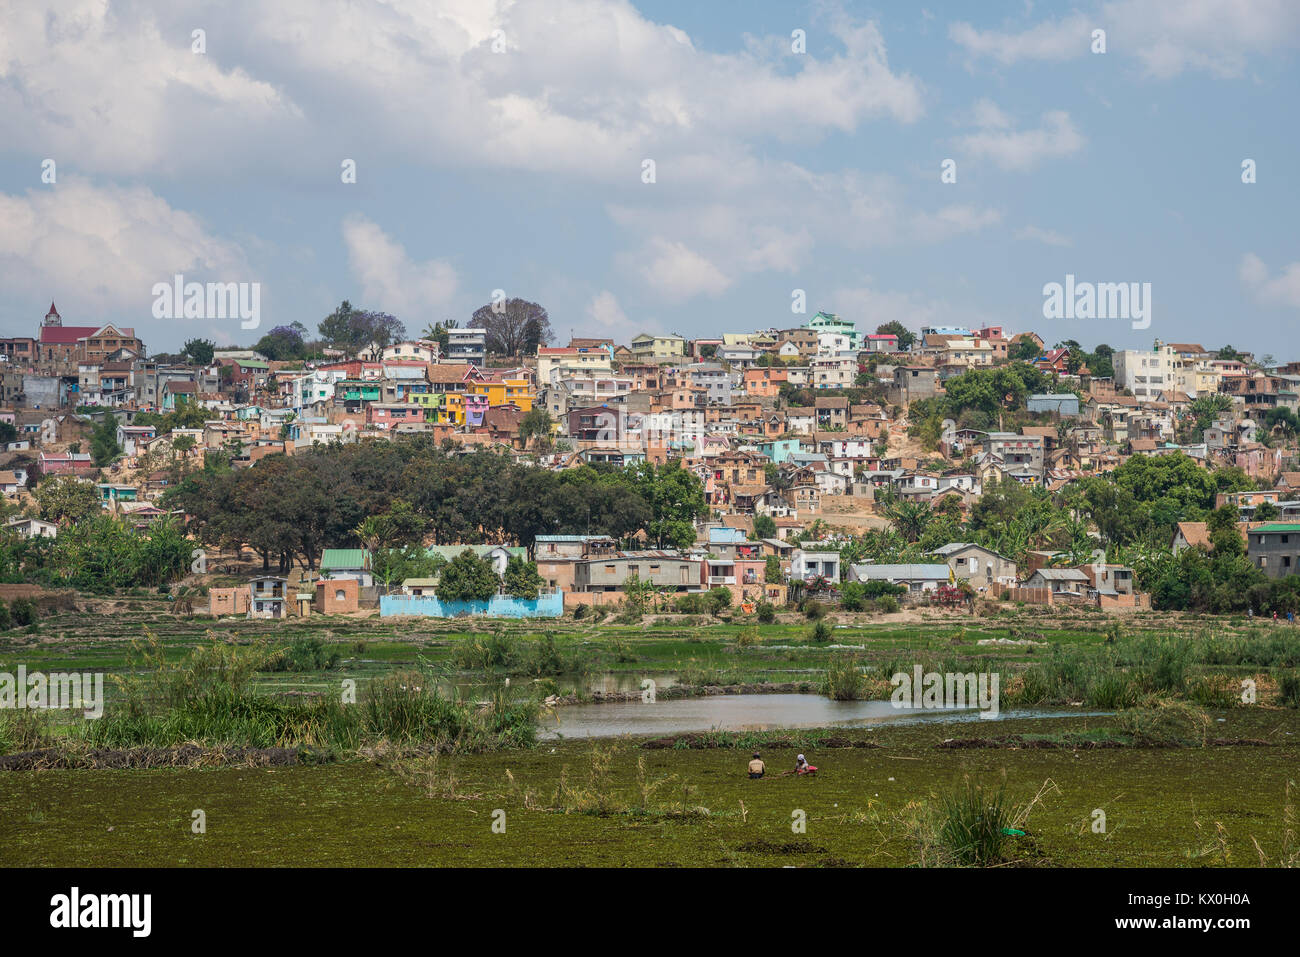 Residential houses cover the hill side. Antananarivo, Madagascar, Africa. Stock Photo